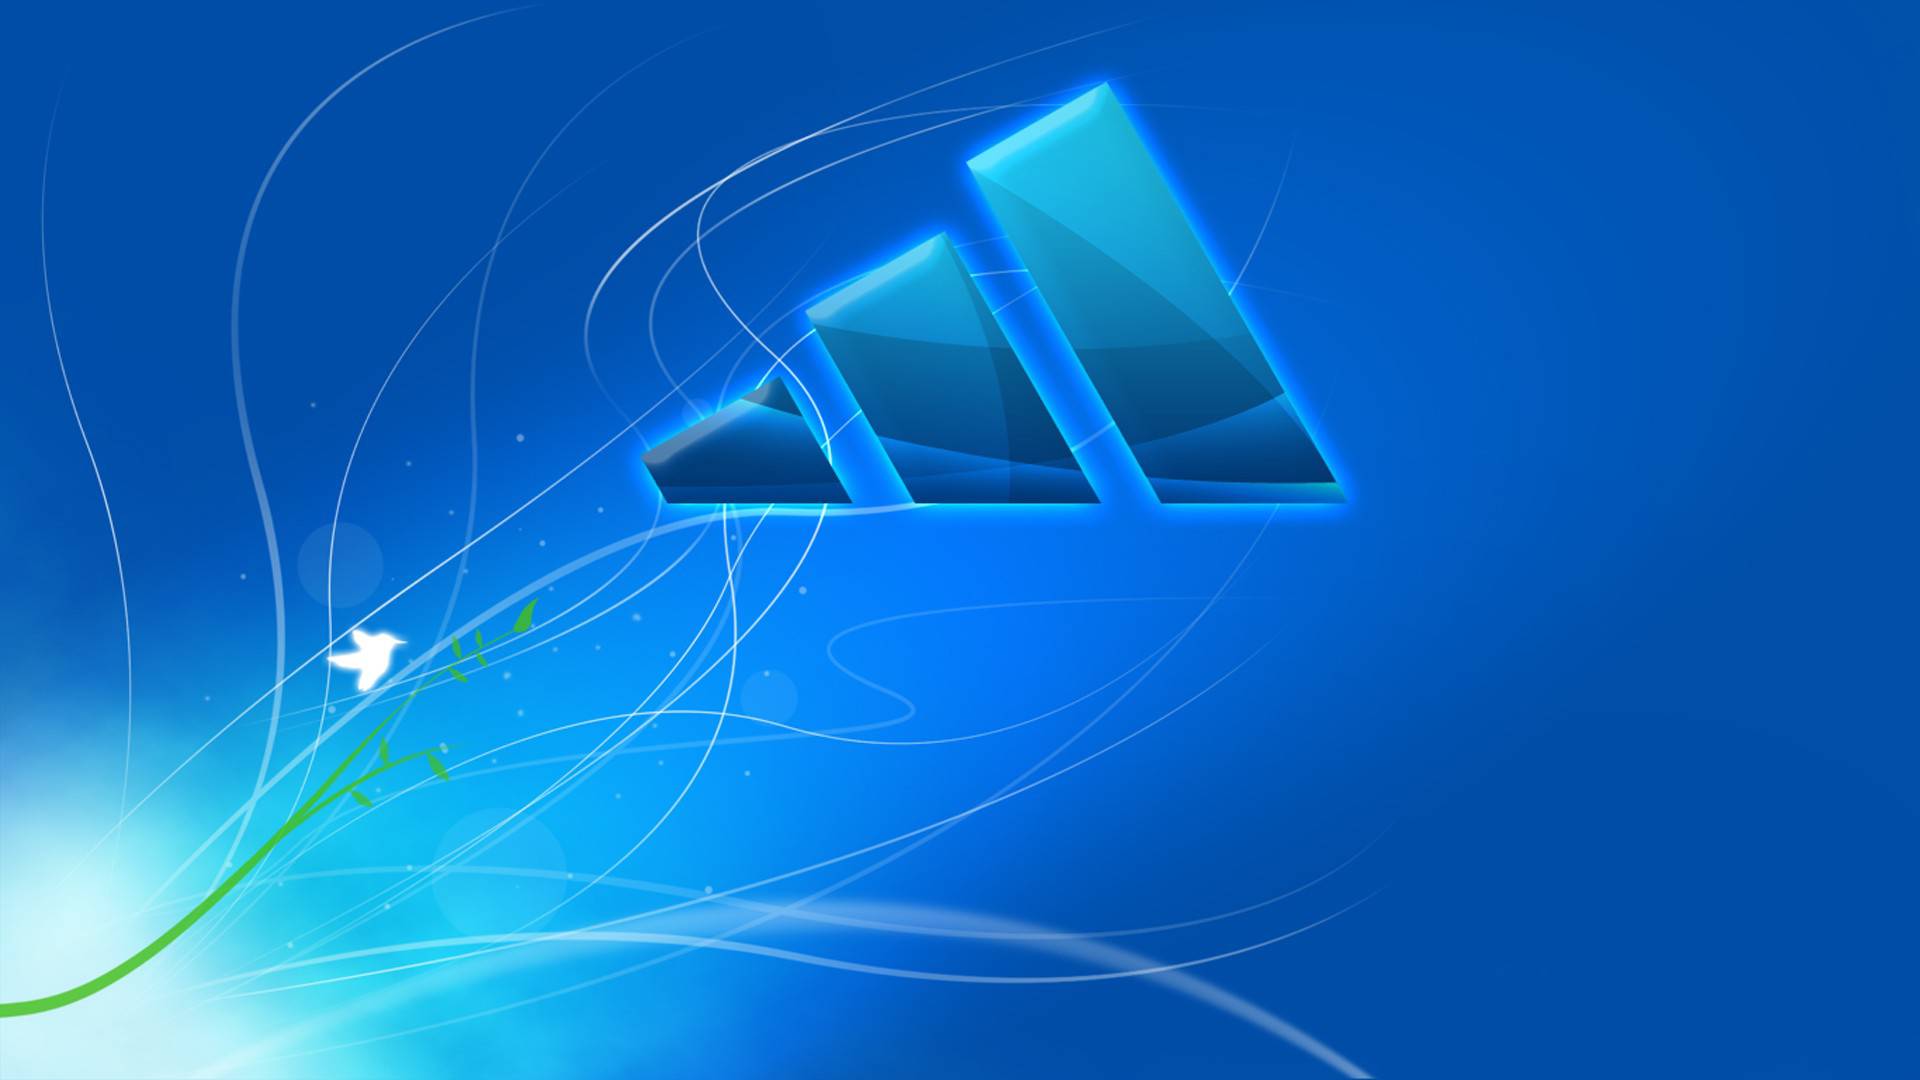 Windows seven wallpaper High Quality and Resolution